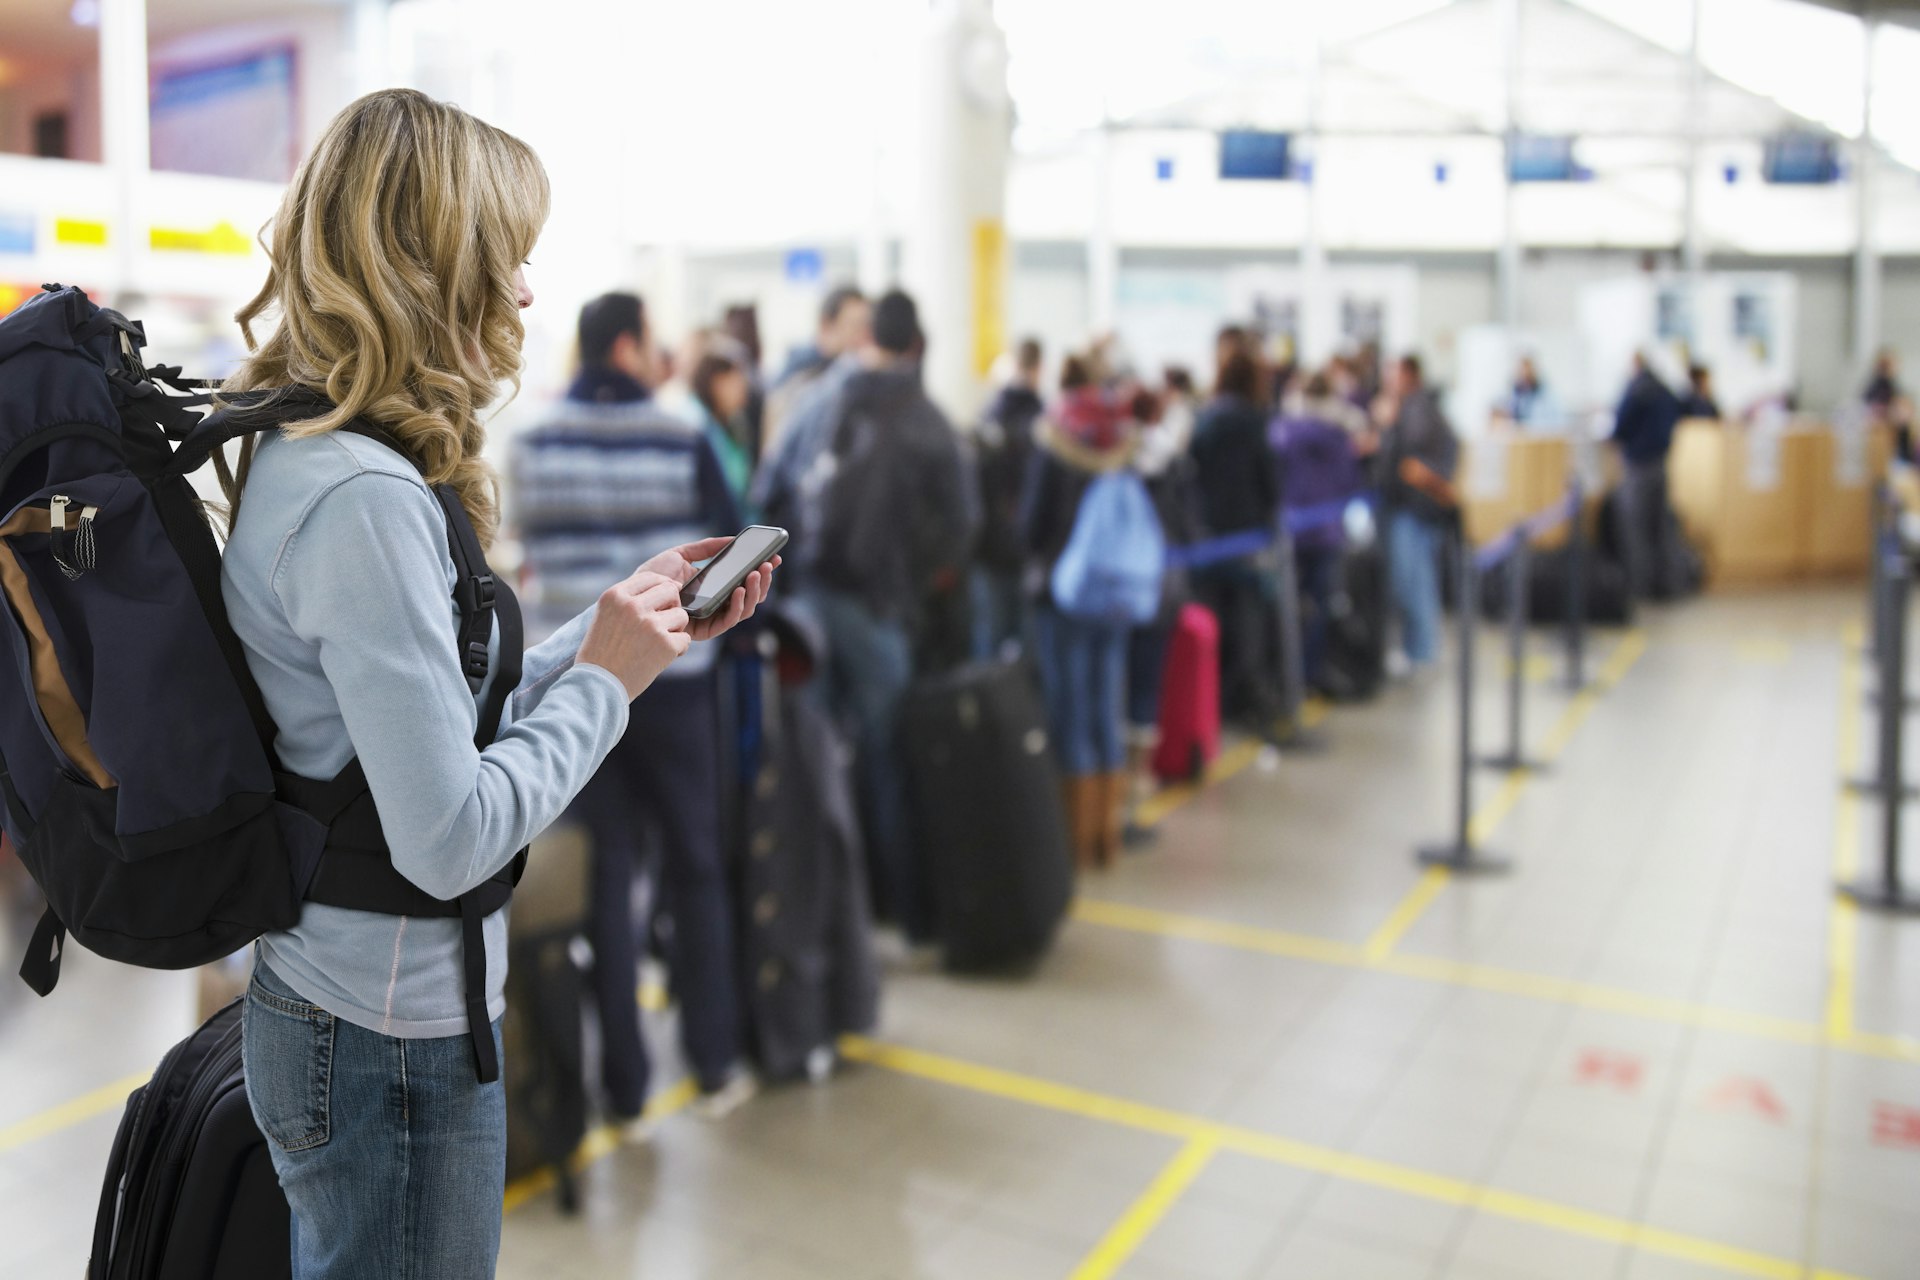 A woman waits in a line to board a plane. She's playing with her phone